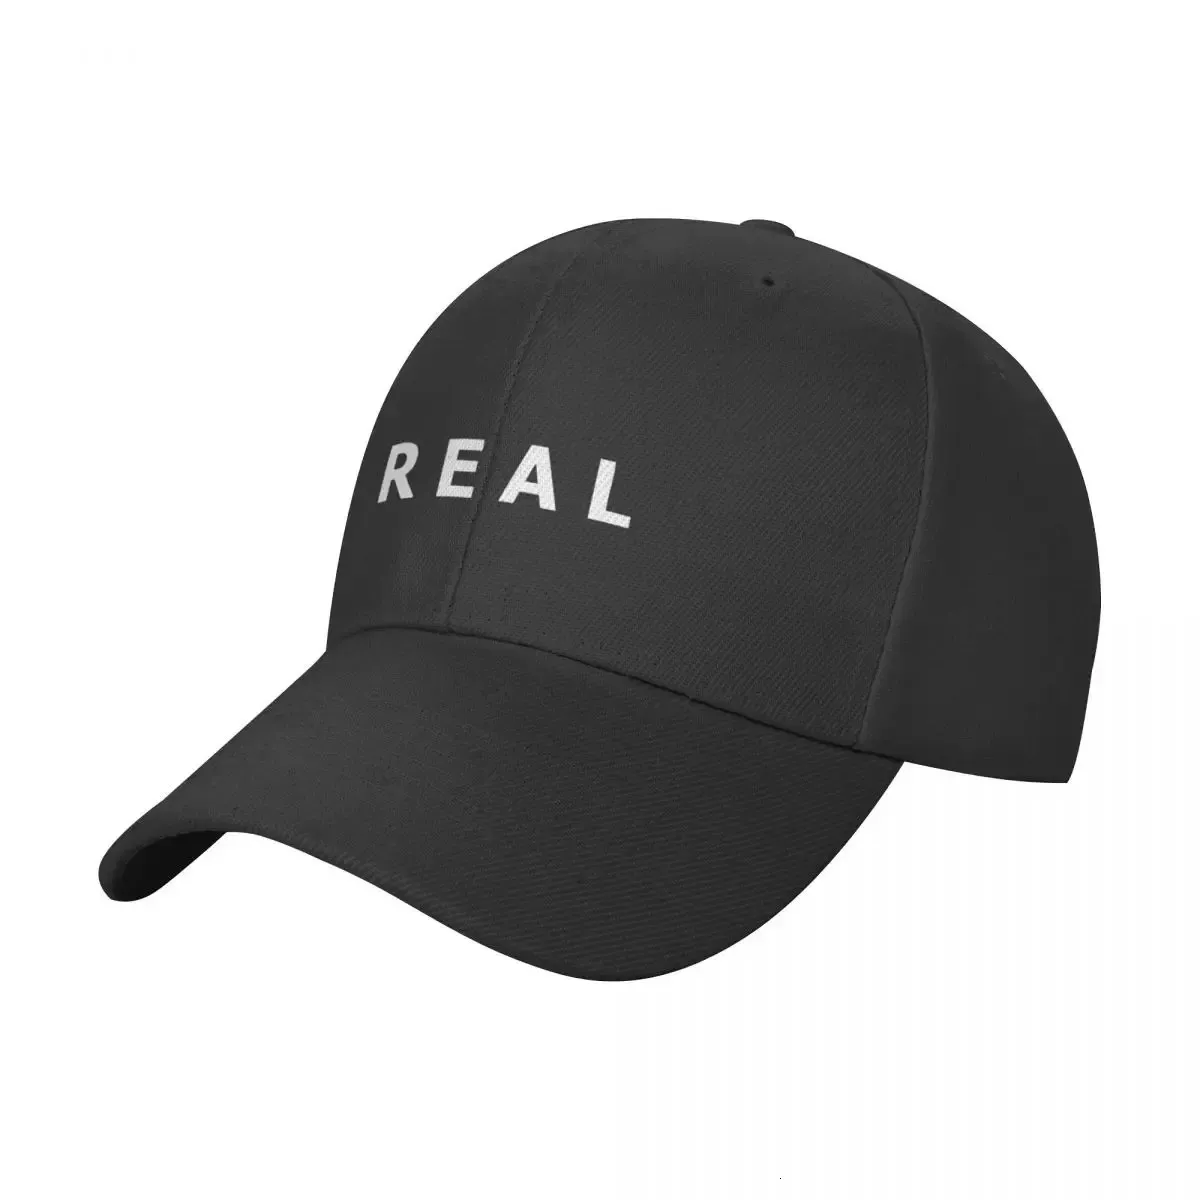 Selling Real Therapy Session NF Merchandise Cap Baseball hat winter hats Mens caps Womens 231228